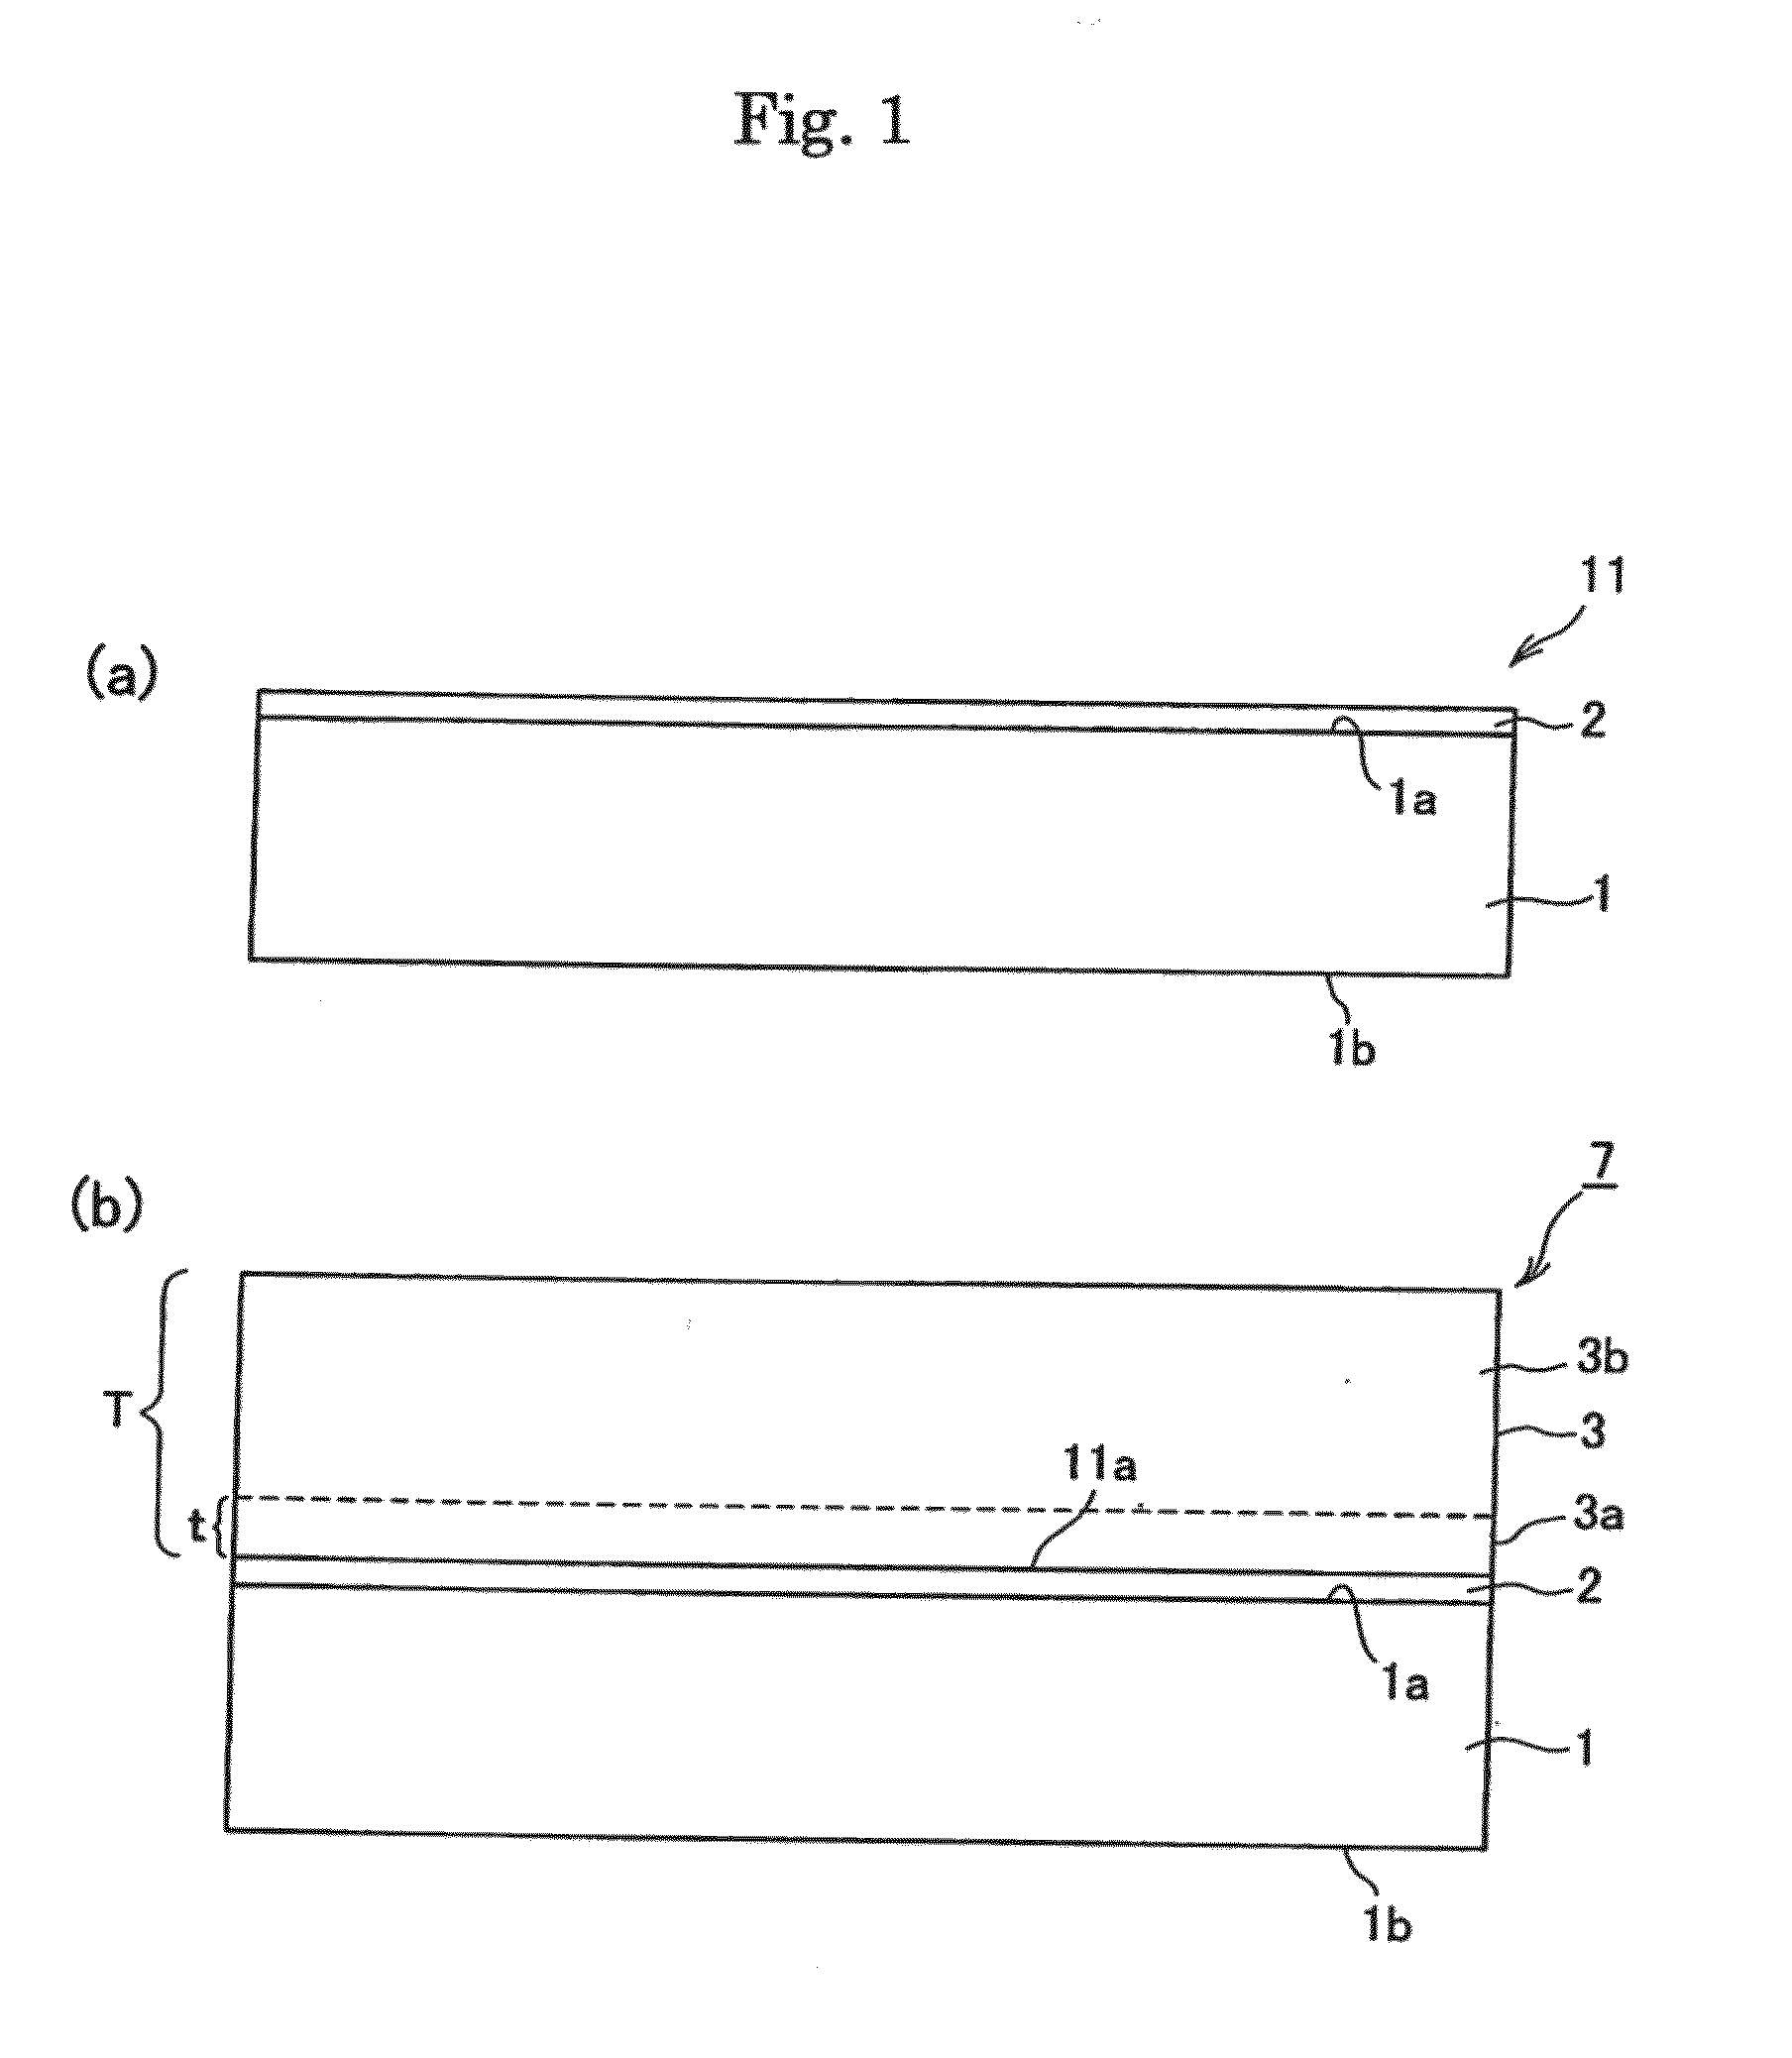 Semiconductor Light-Emitting Element and Laminate Containing Same